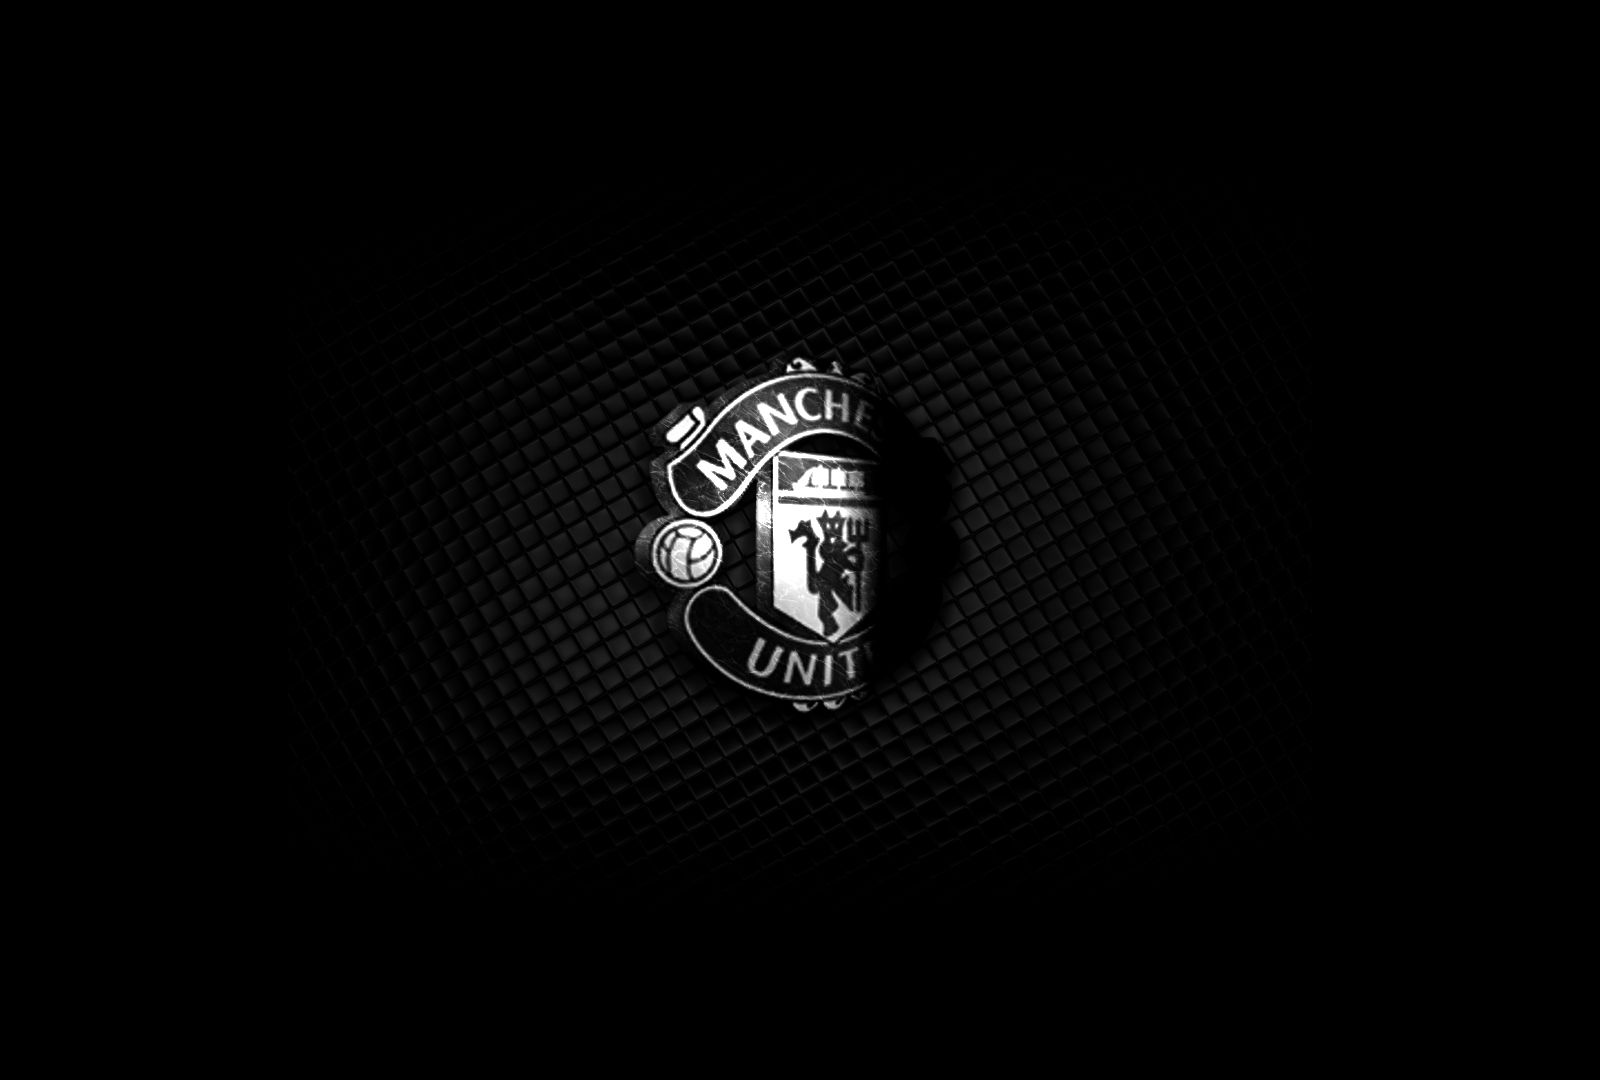 Man United Hd Wallpapers On Wallpaperdog Posted by neva riyadie posted on februari 19, 2019 with no comments. man united hd wallpapers on wallpaperdog